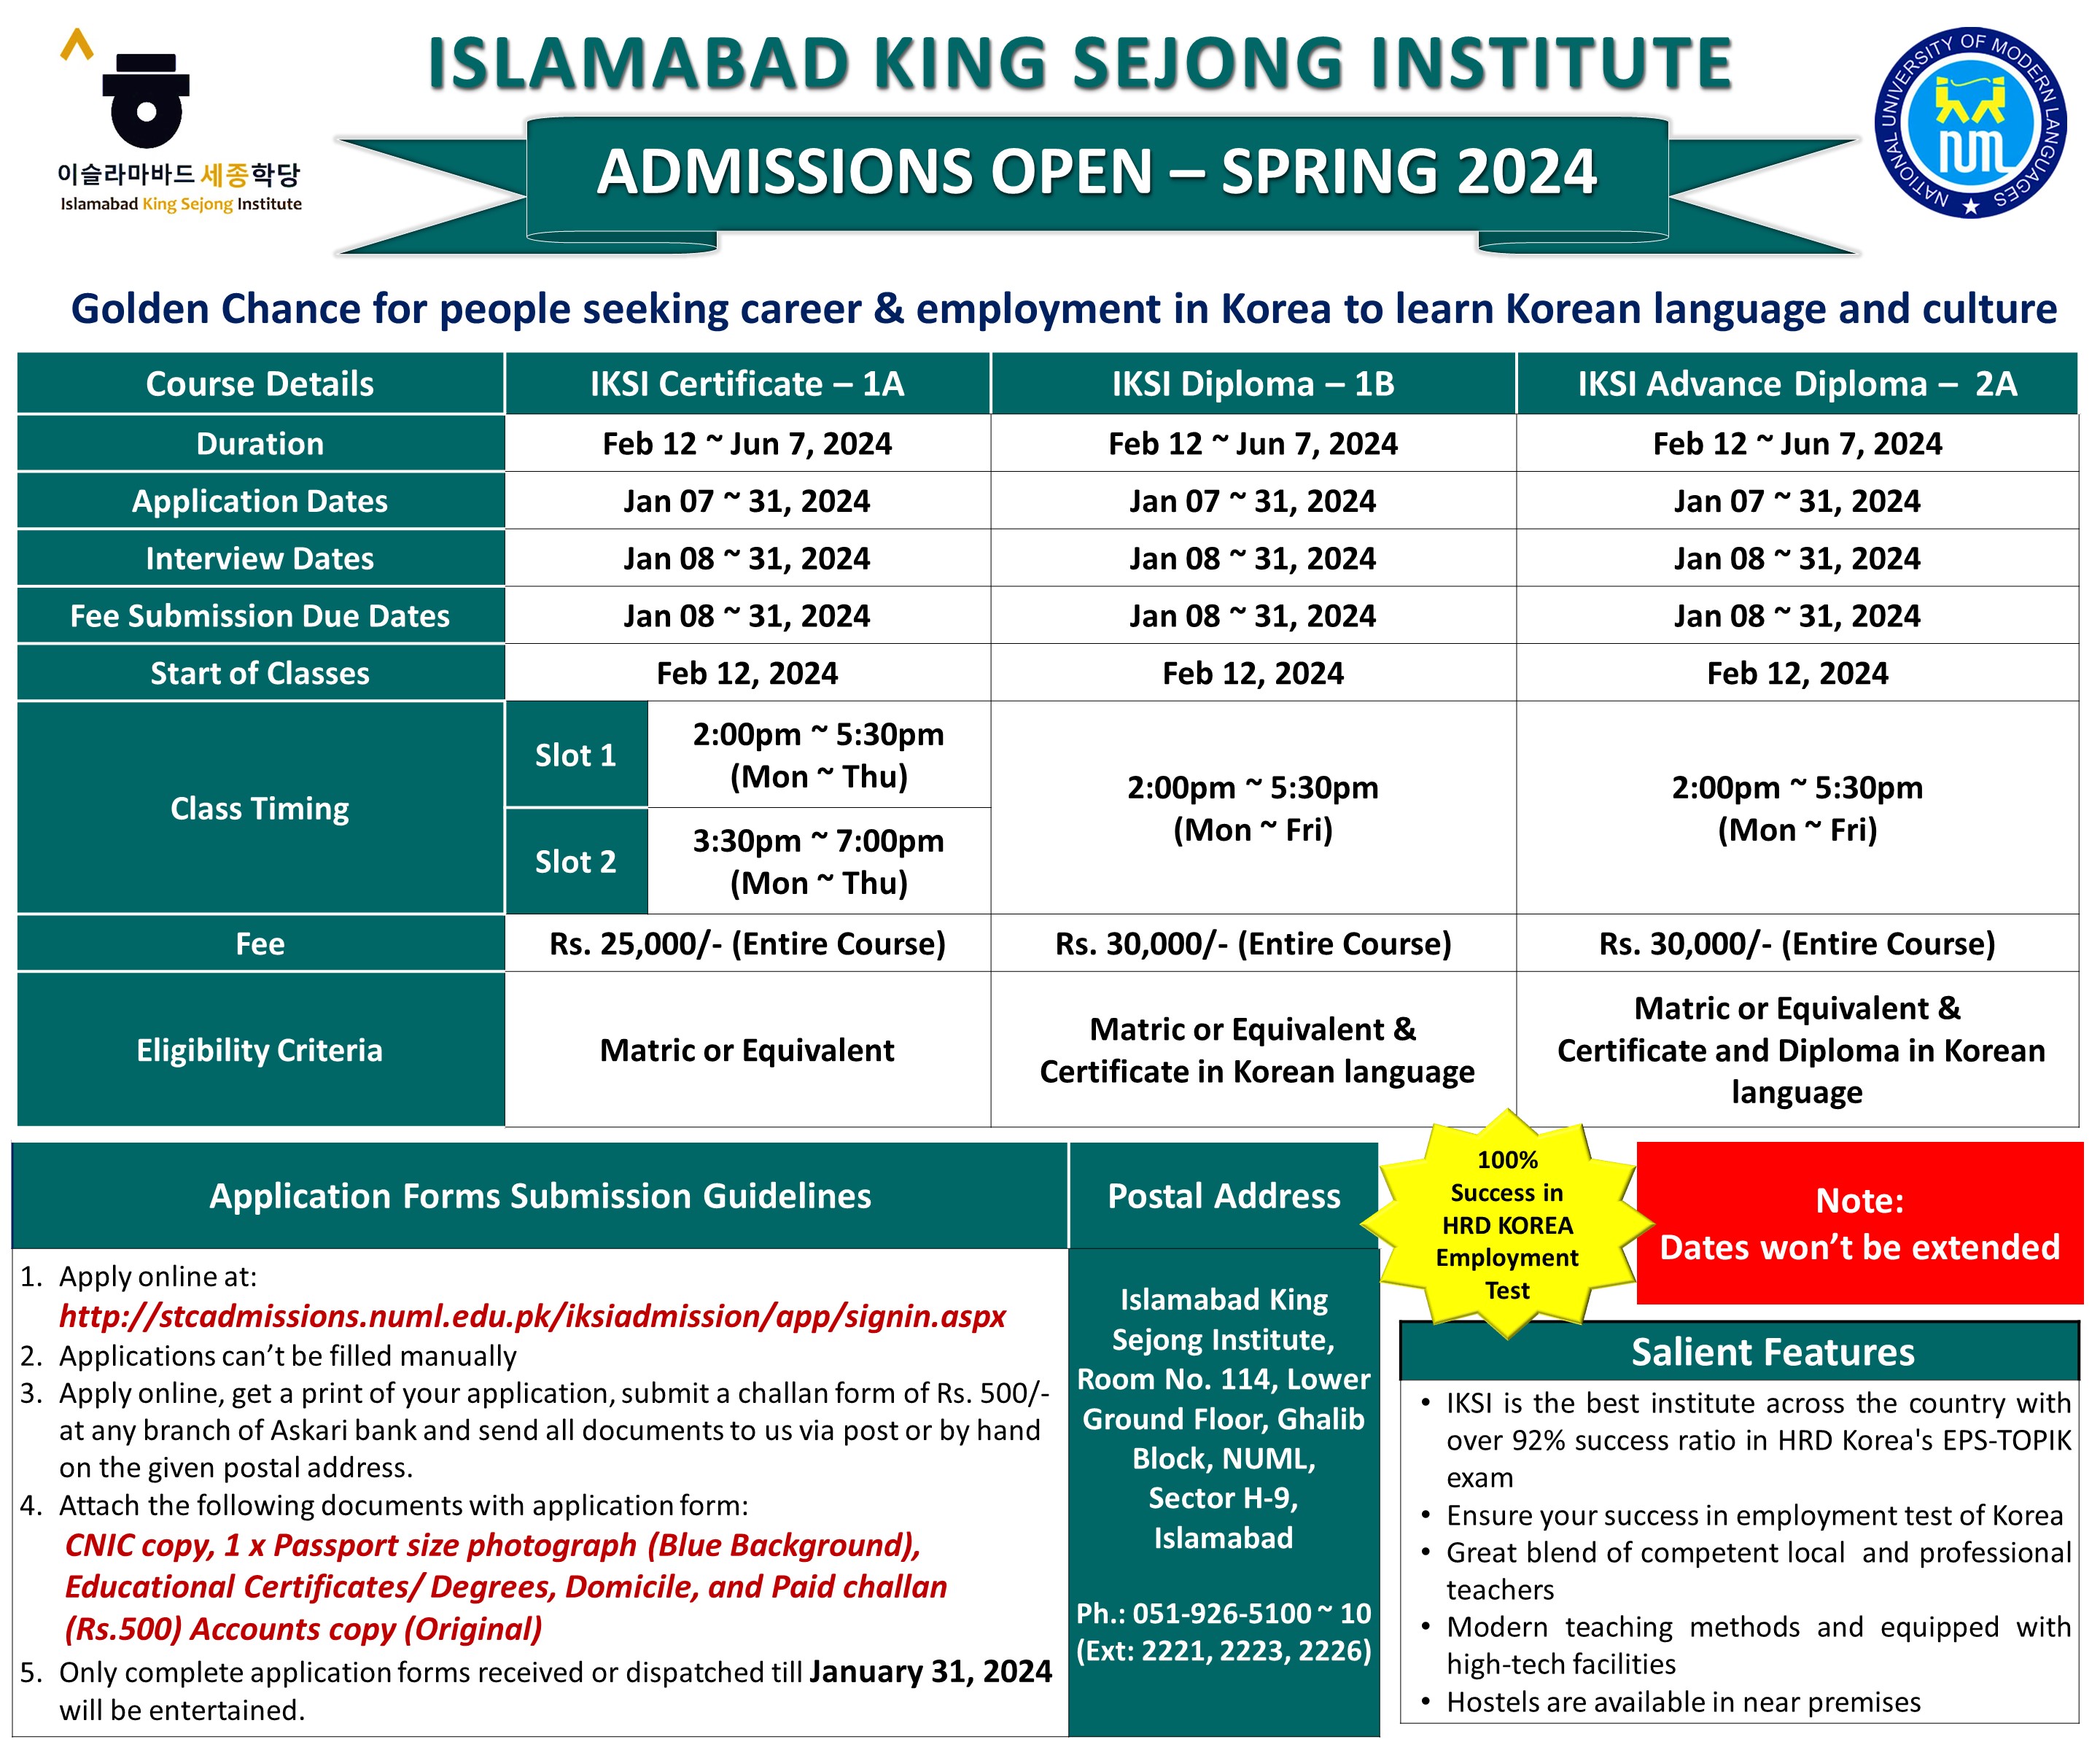 Islamabad King Sejong Admissions Open (Spring 2024)